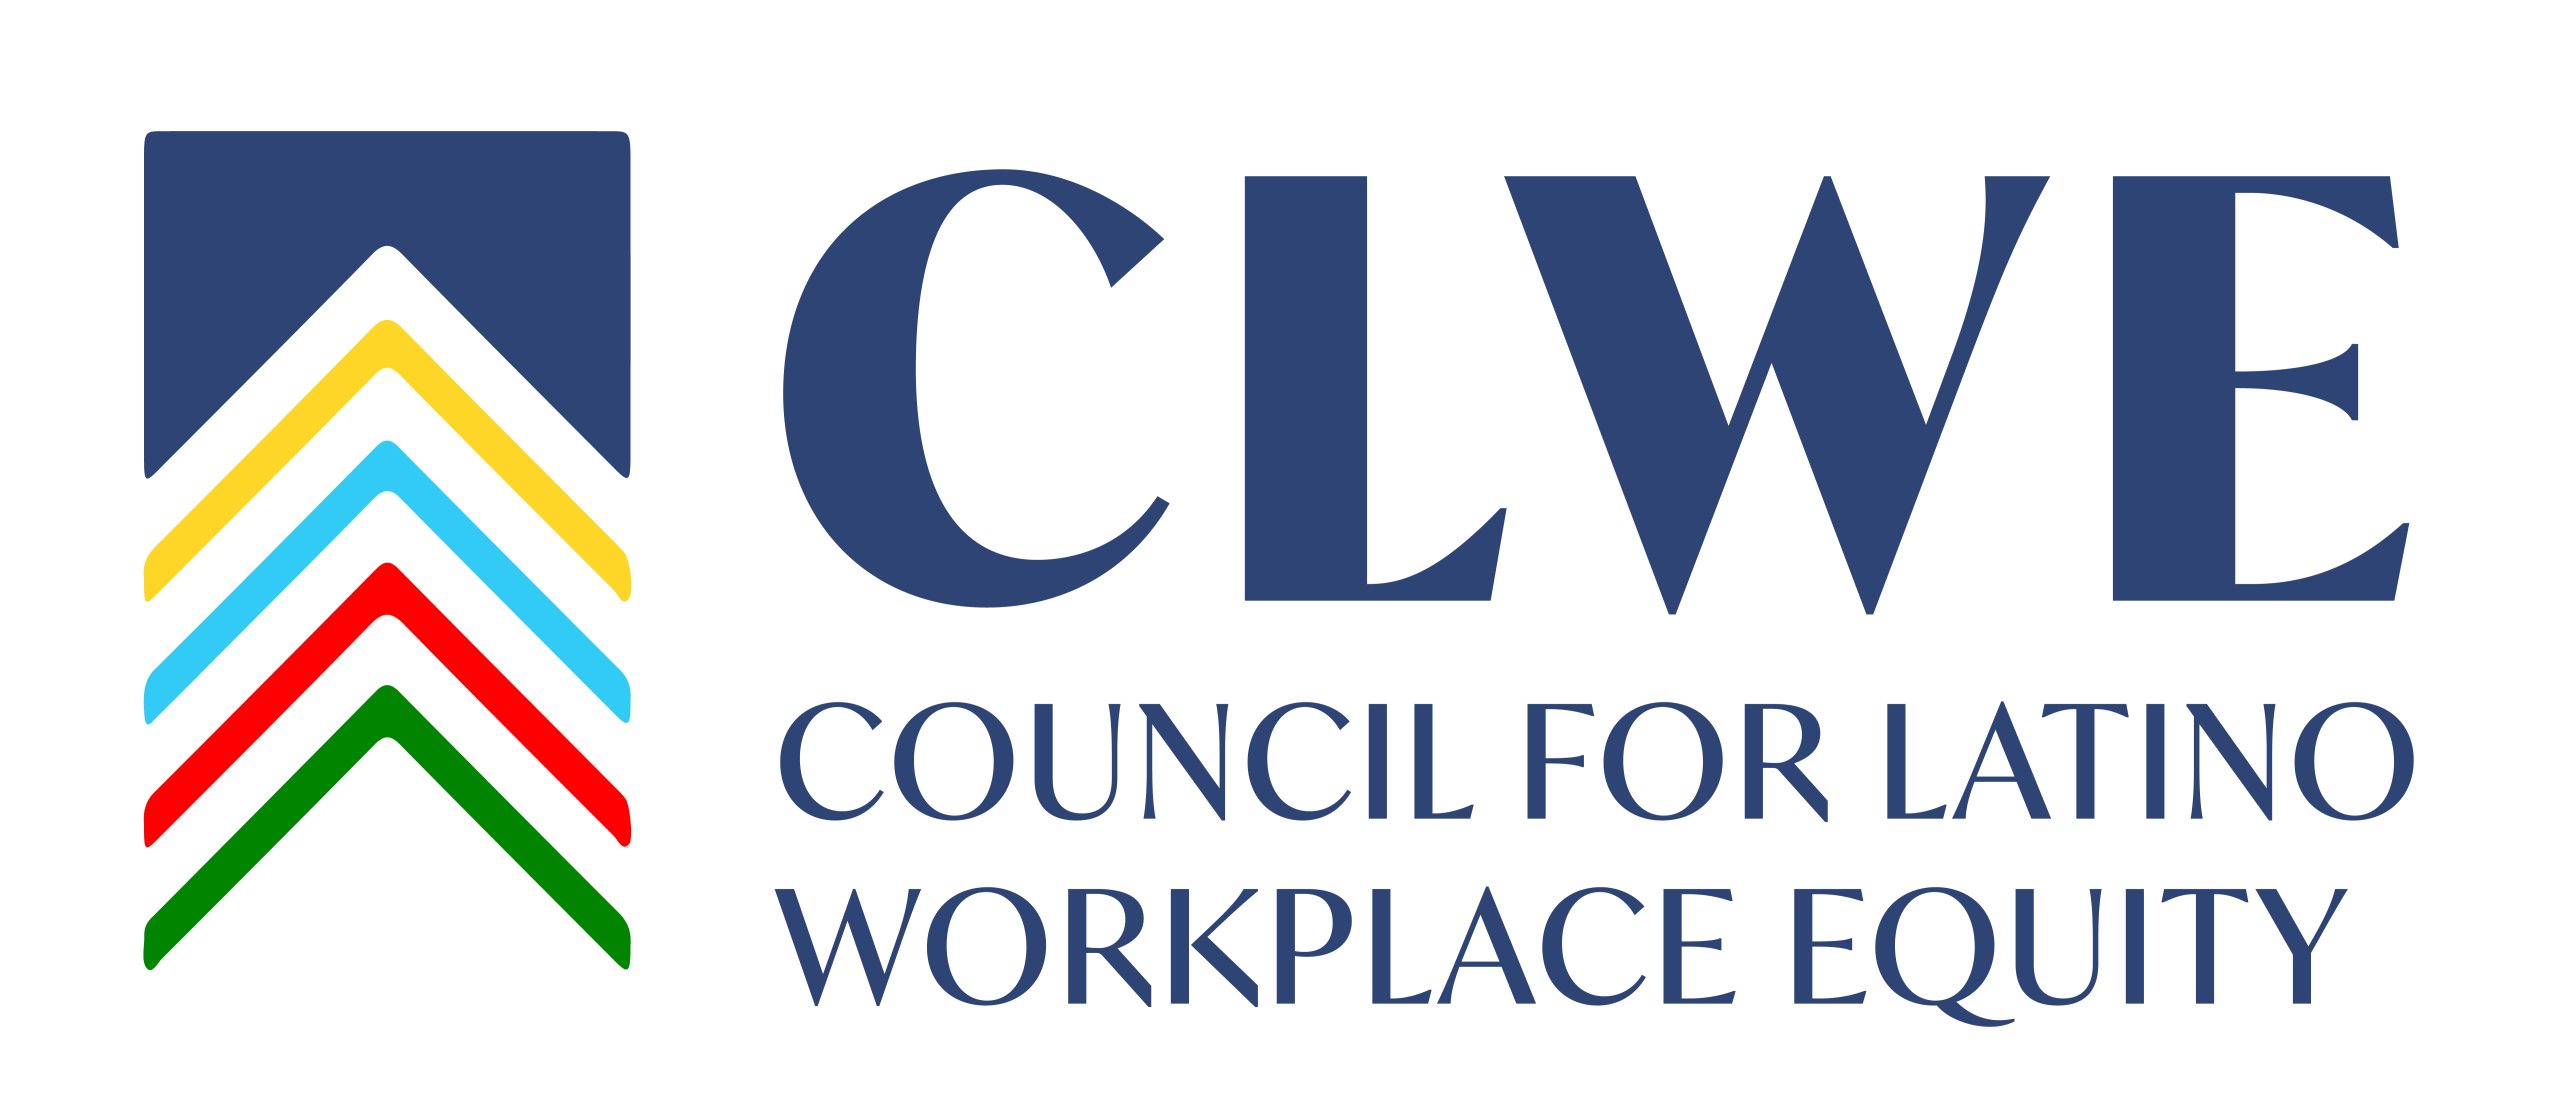 Council for Latino Workplace Equity